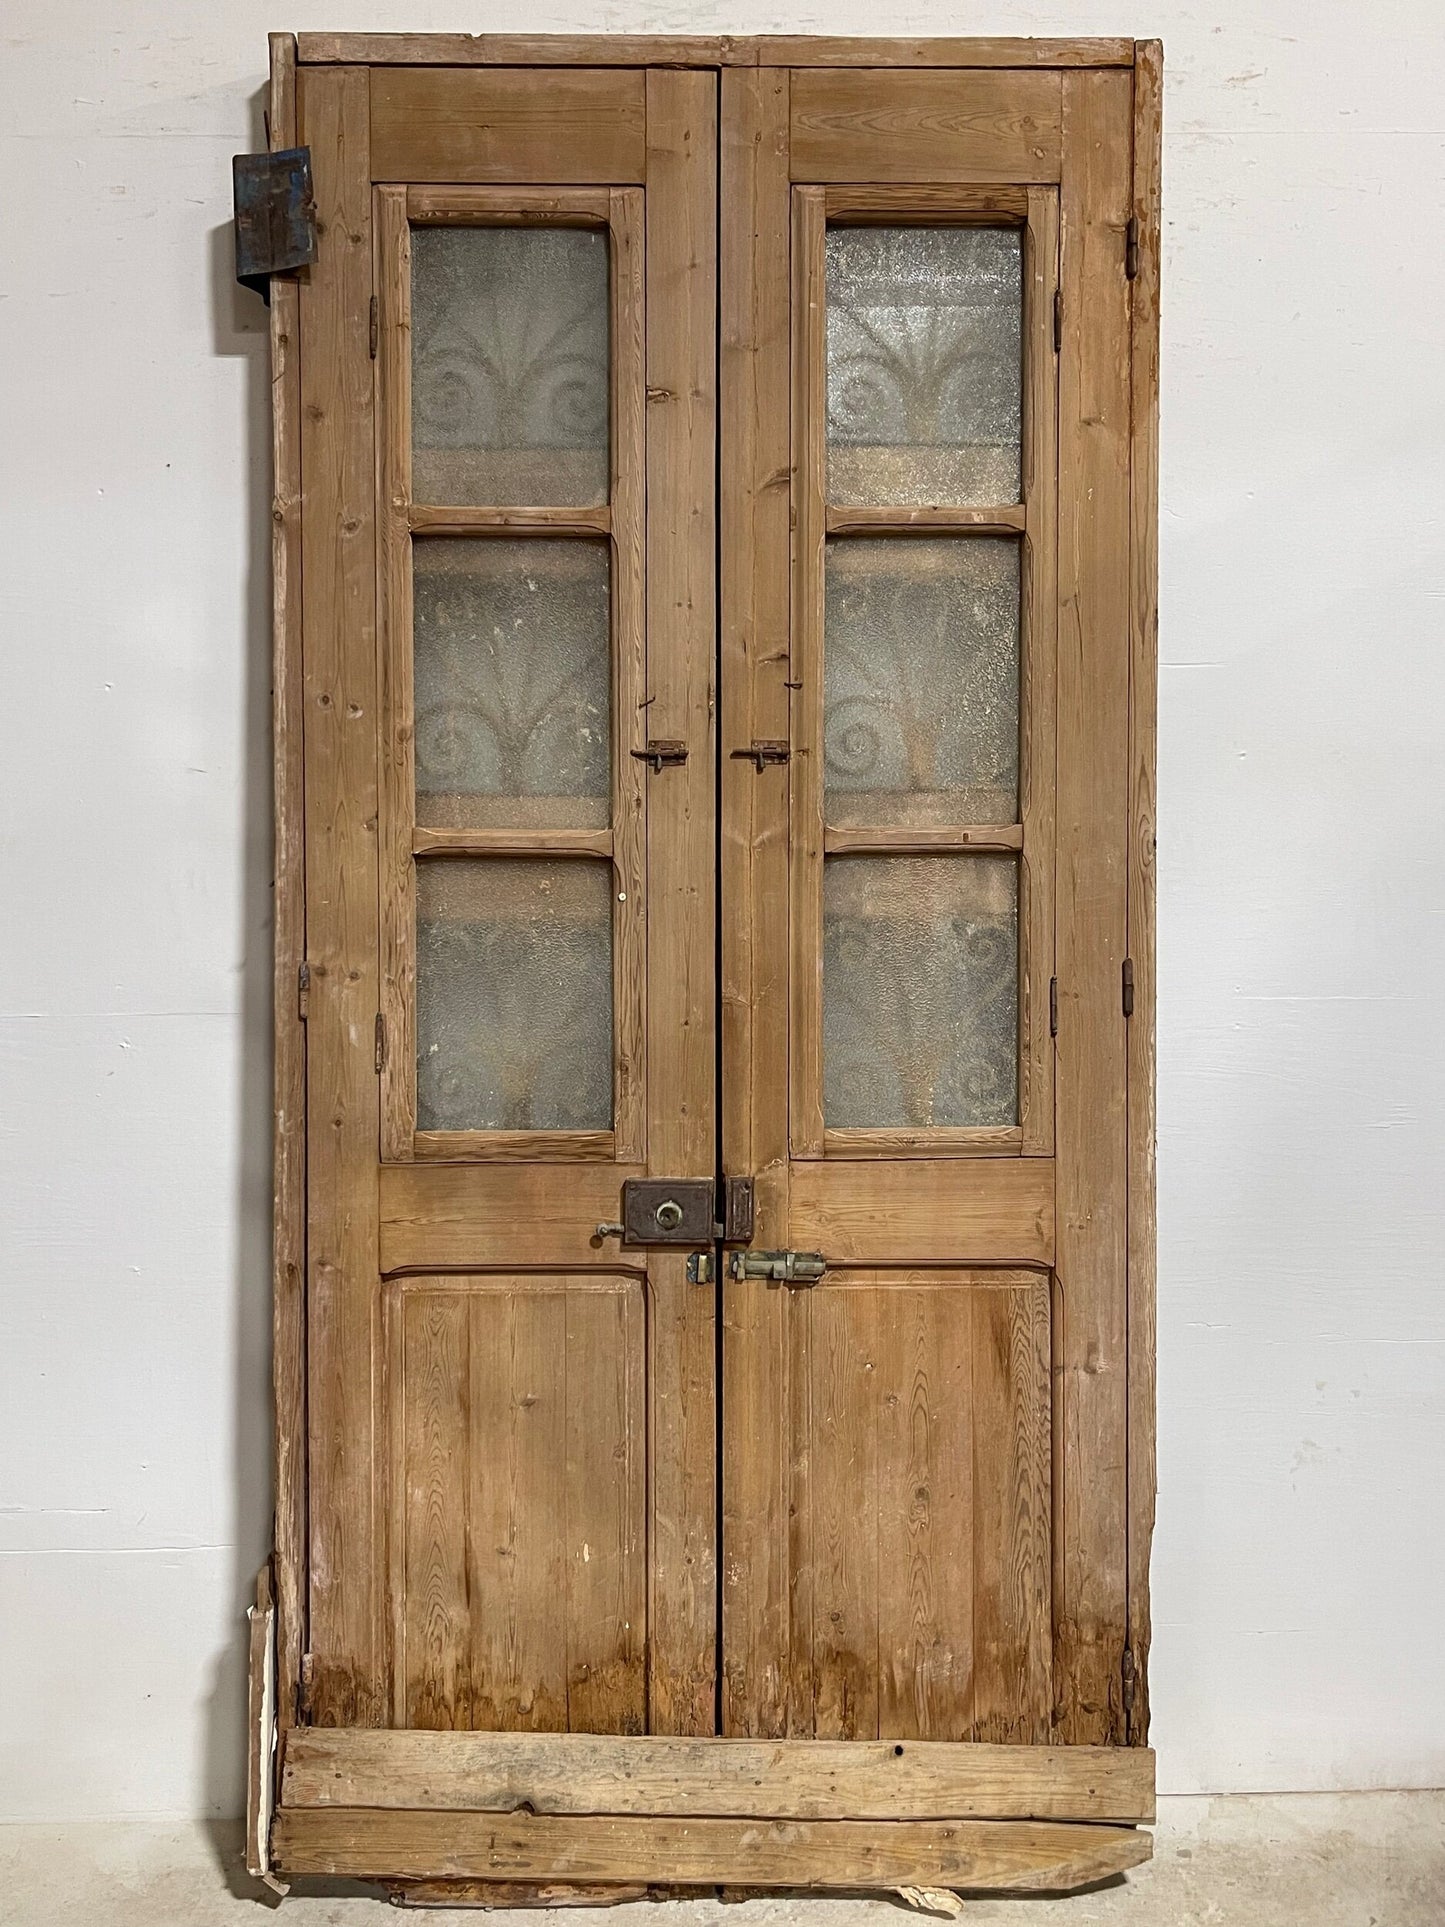 Antique French door with iron in a frame  (F 100x47.5) (D 98x44) H0254s